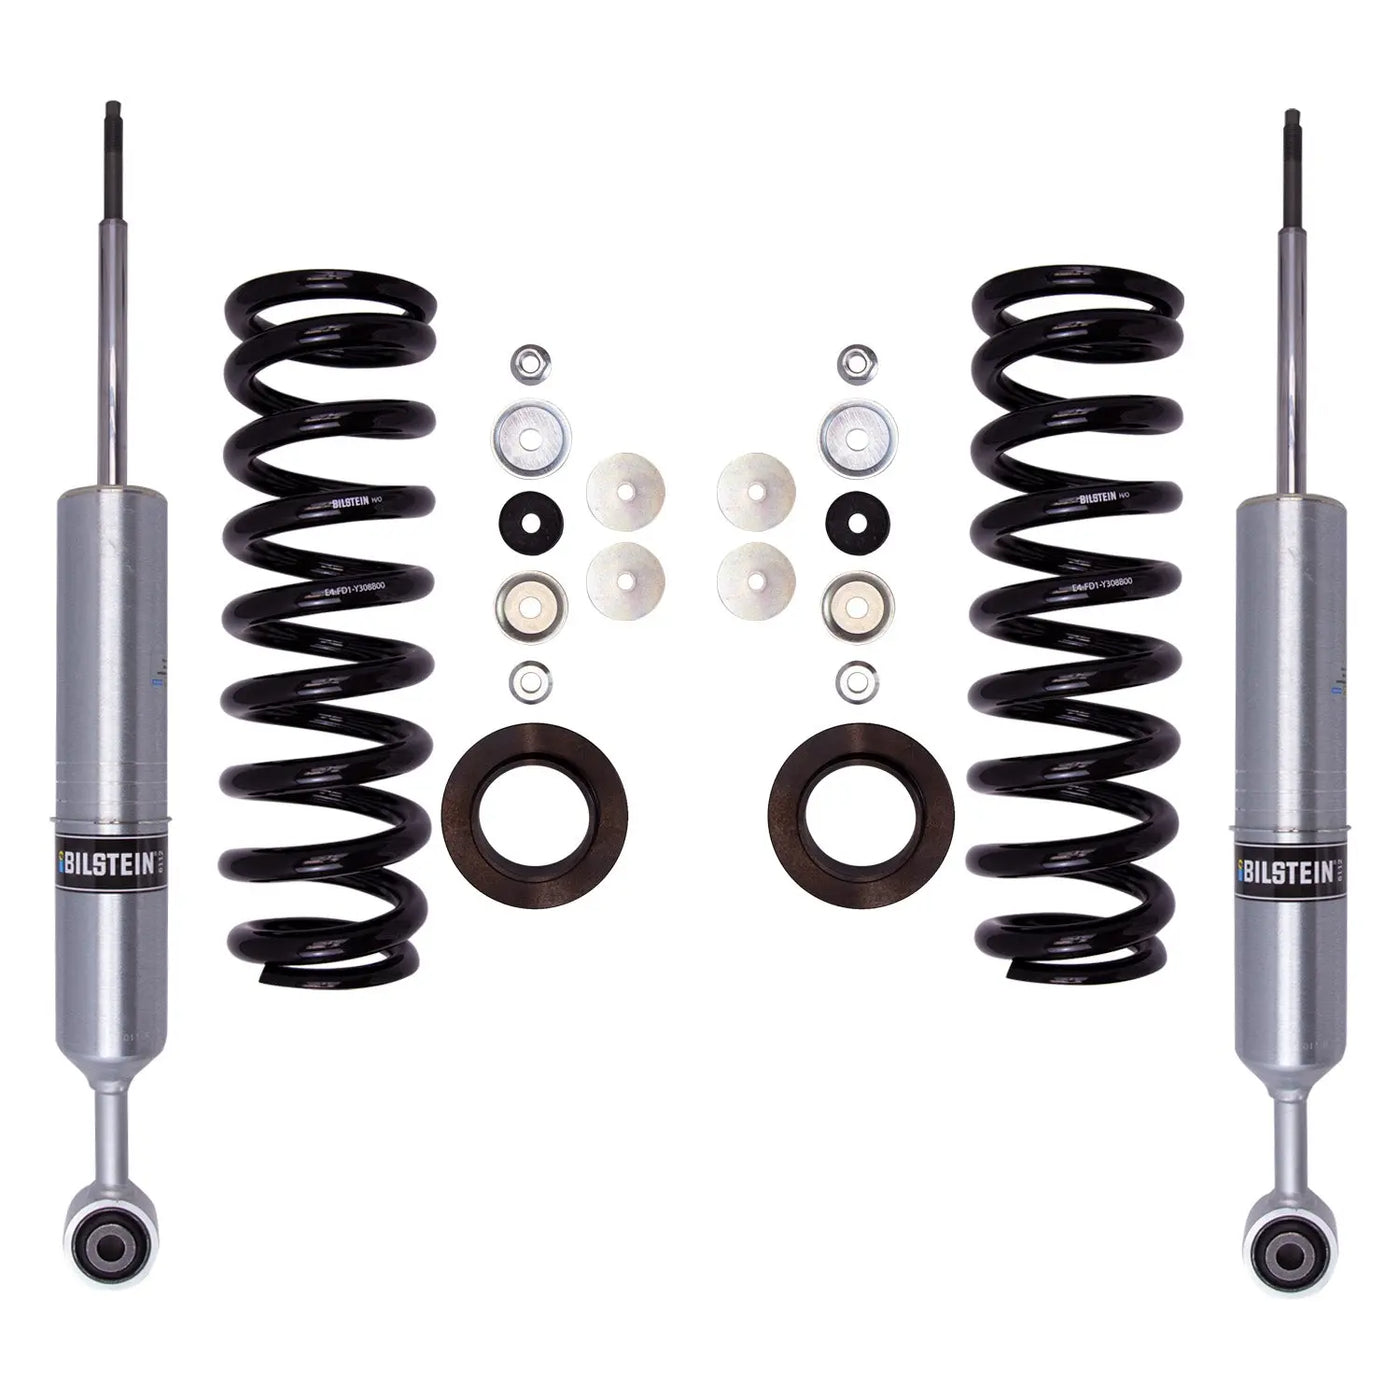 Fully Assembled Bilstein 6112 Front Suspension Kit for Toyota Tundra 2007-2021, Sequoia 2008-2022 - Wheel Every Weekend